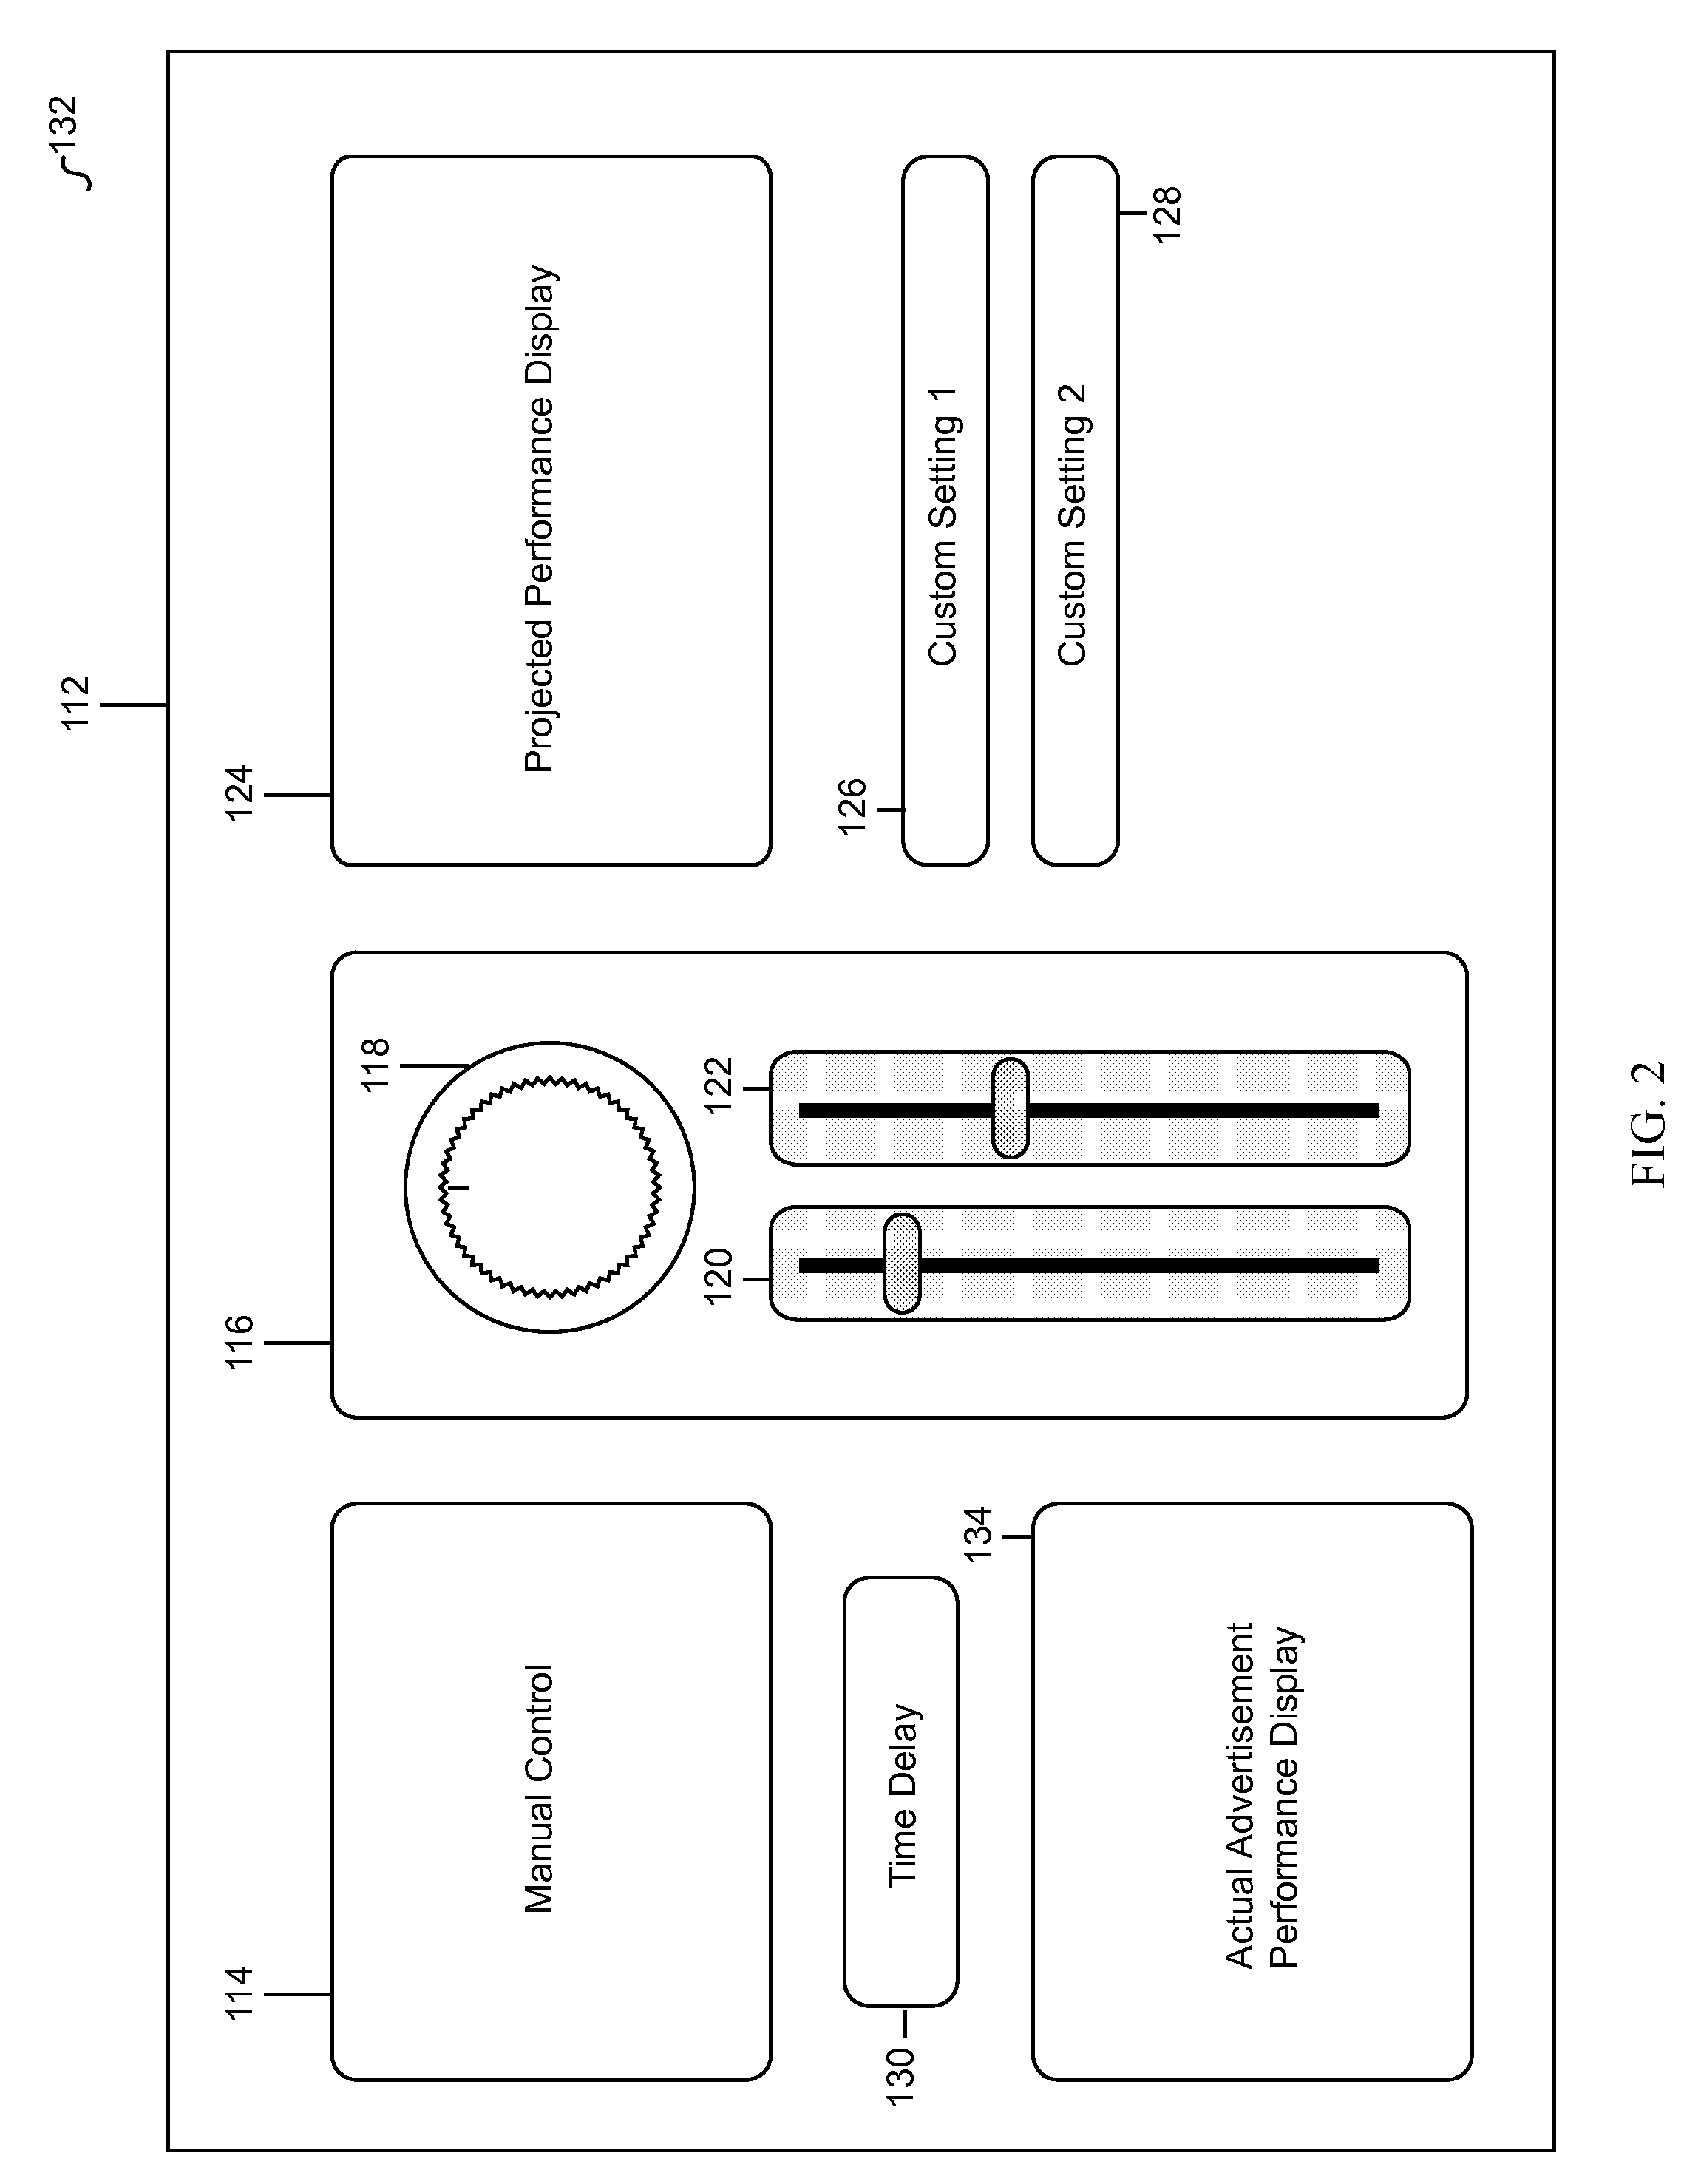 Method and System for Dynamic Advertising